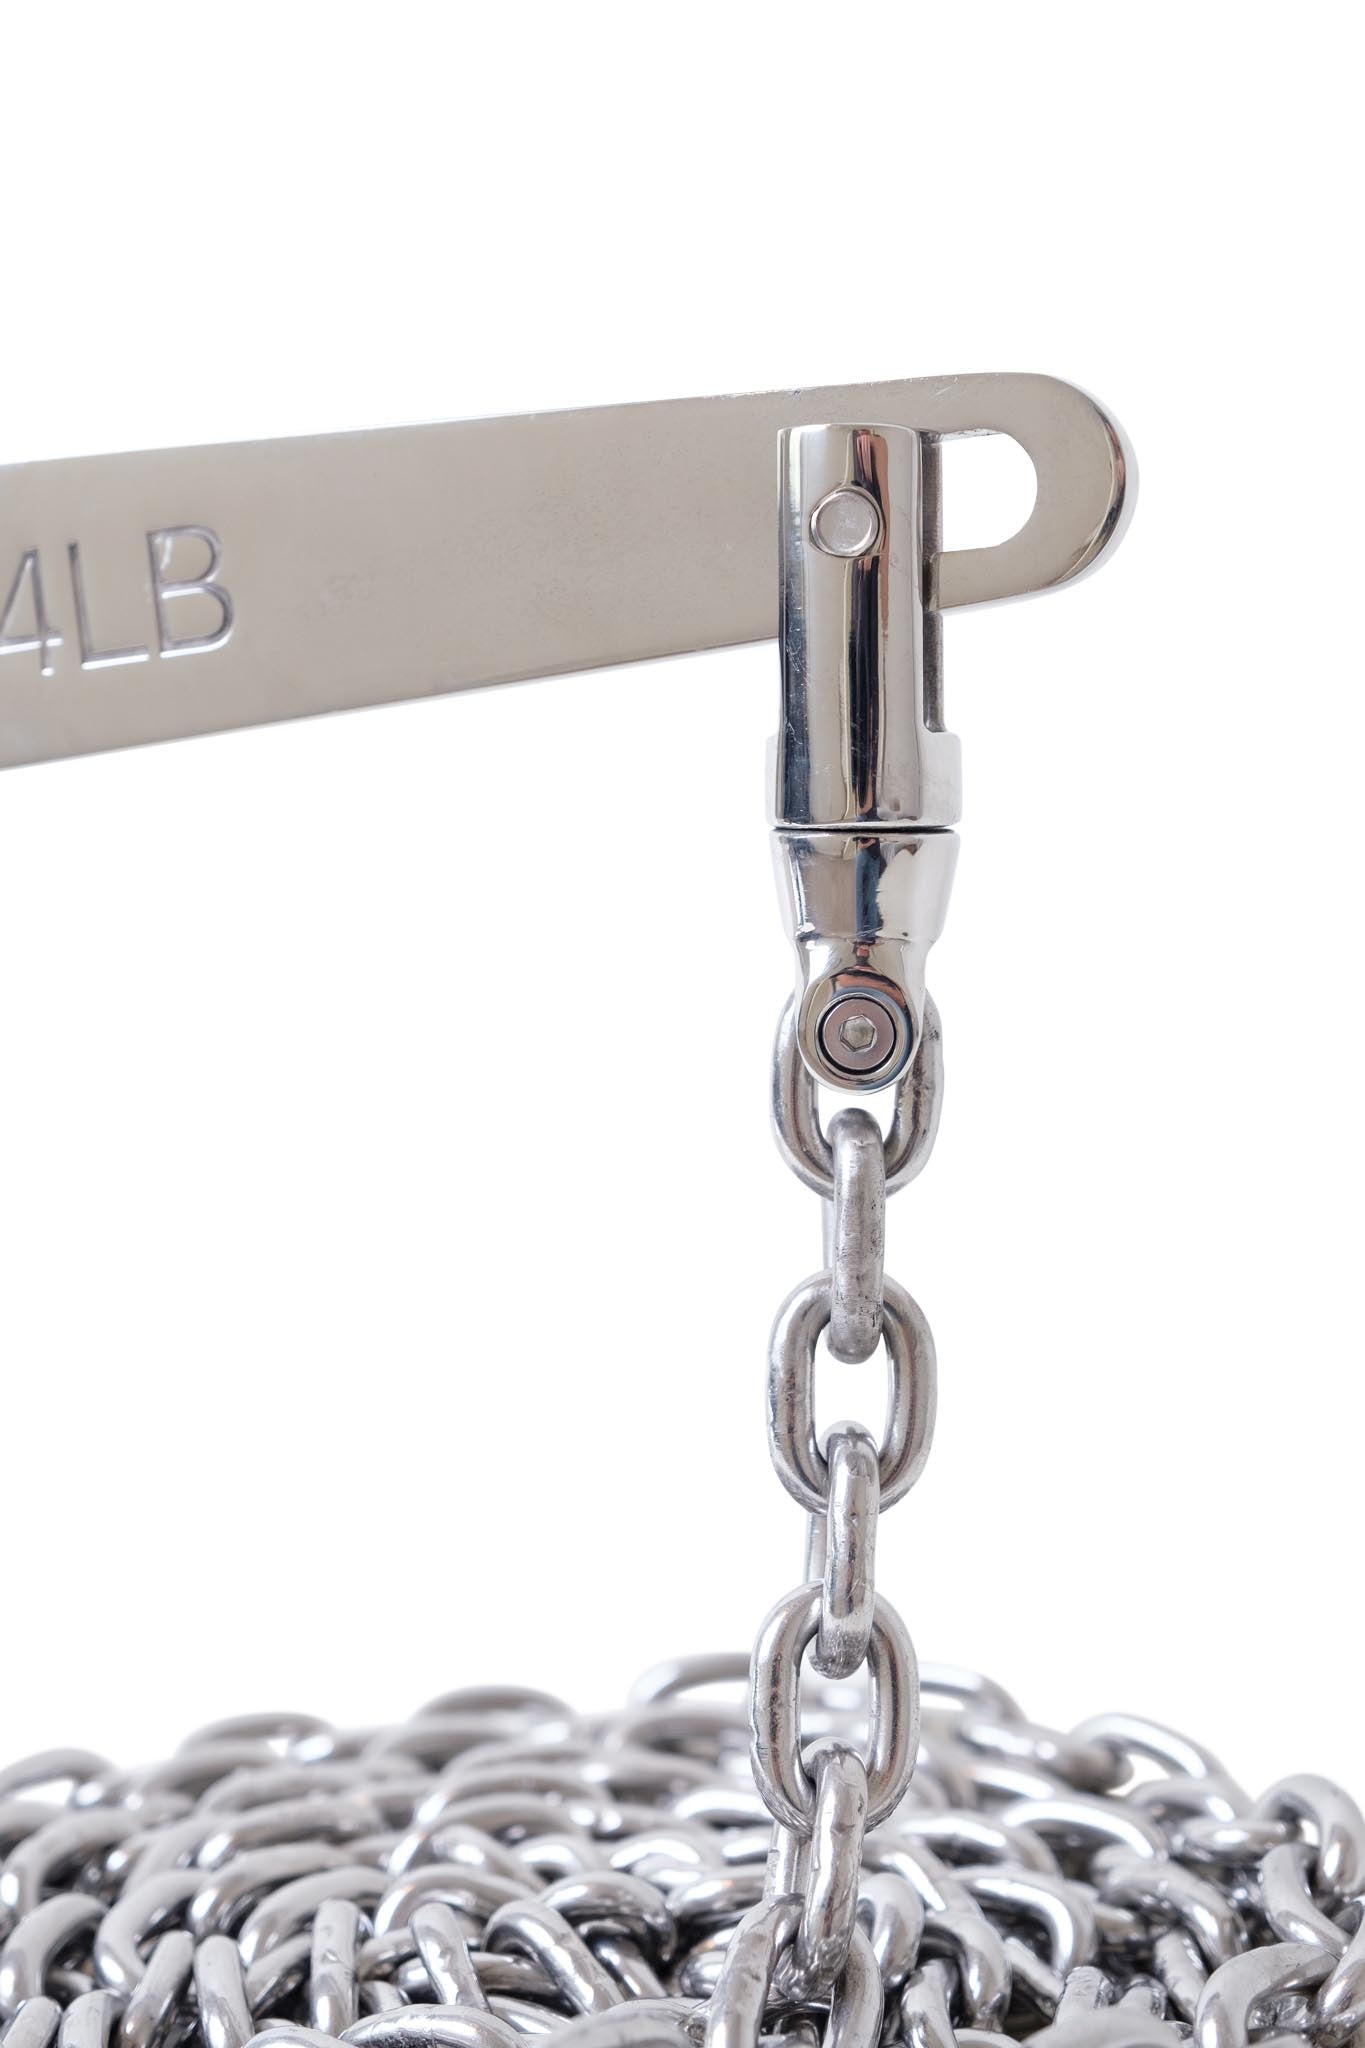 1/2 Inch Anchor Swivel - 316 Marine Grade Stainless Steel attached to chain and anchor